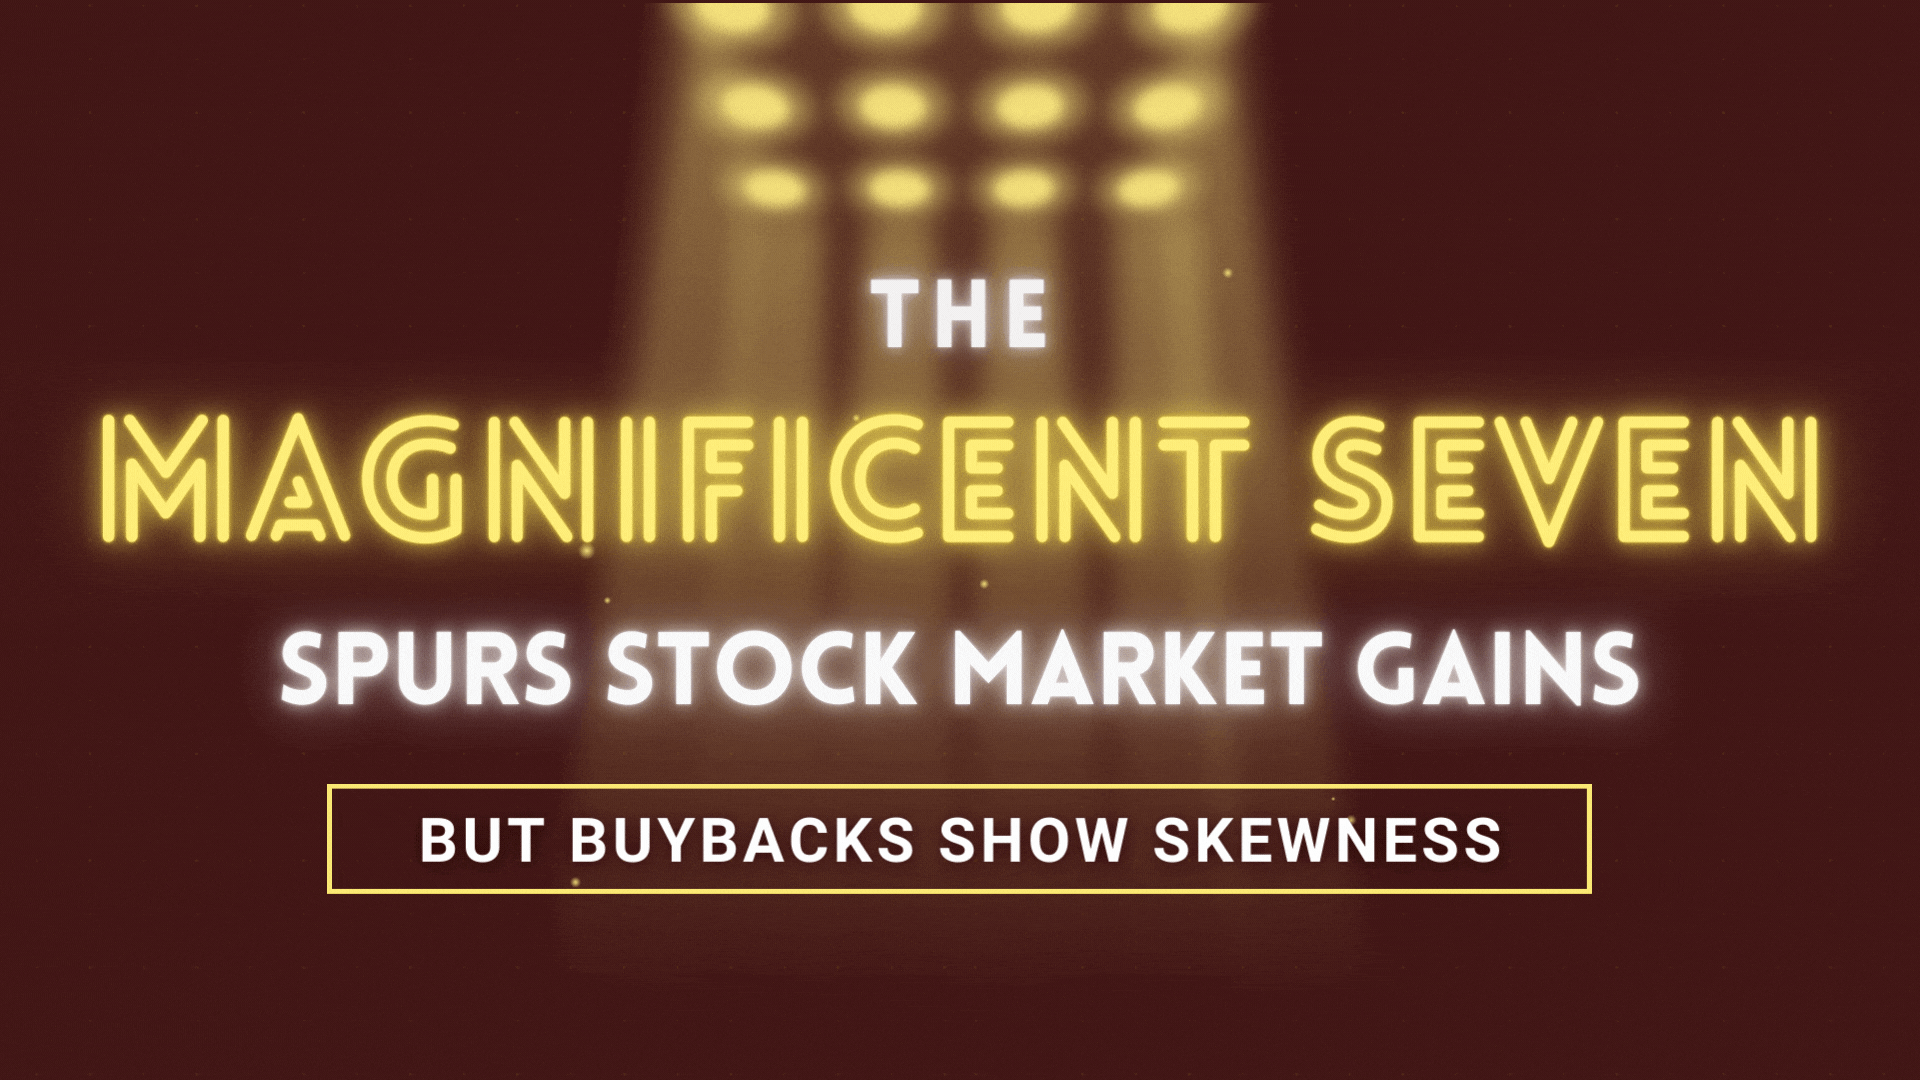 The ‘Magnificent Seven’ Spurs Stock Market Gains, But Buybacks Show Skewness: Mid-Year Insights